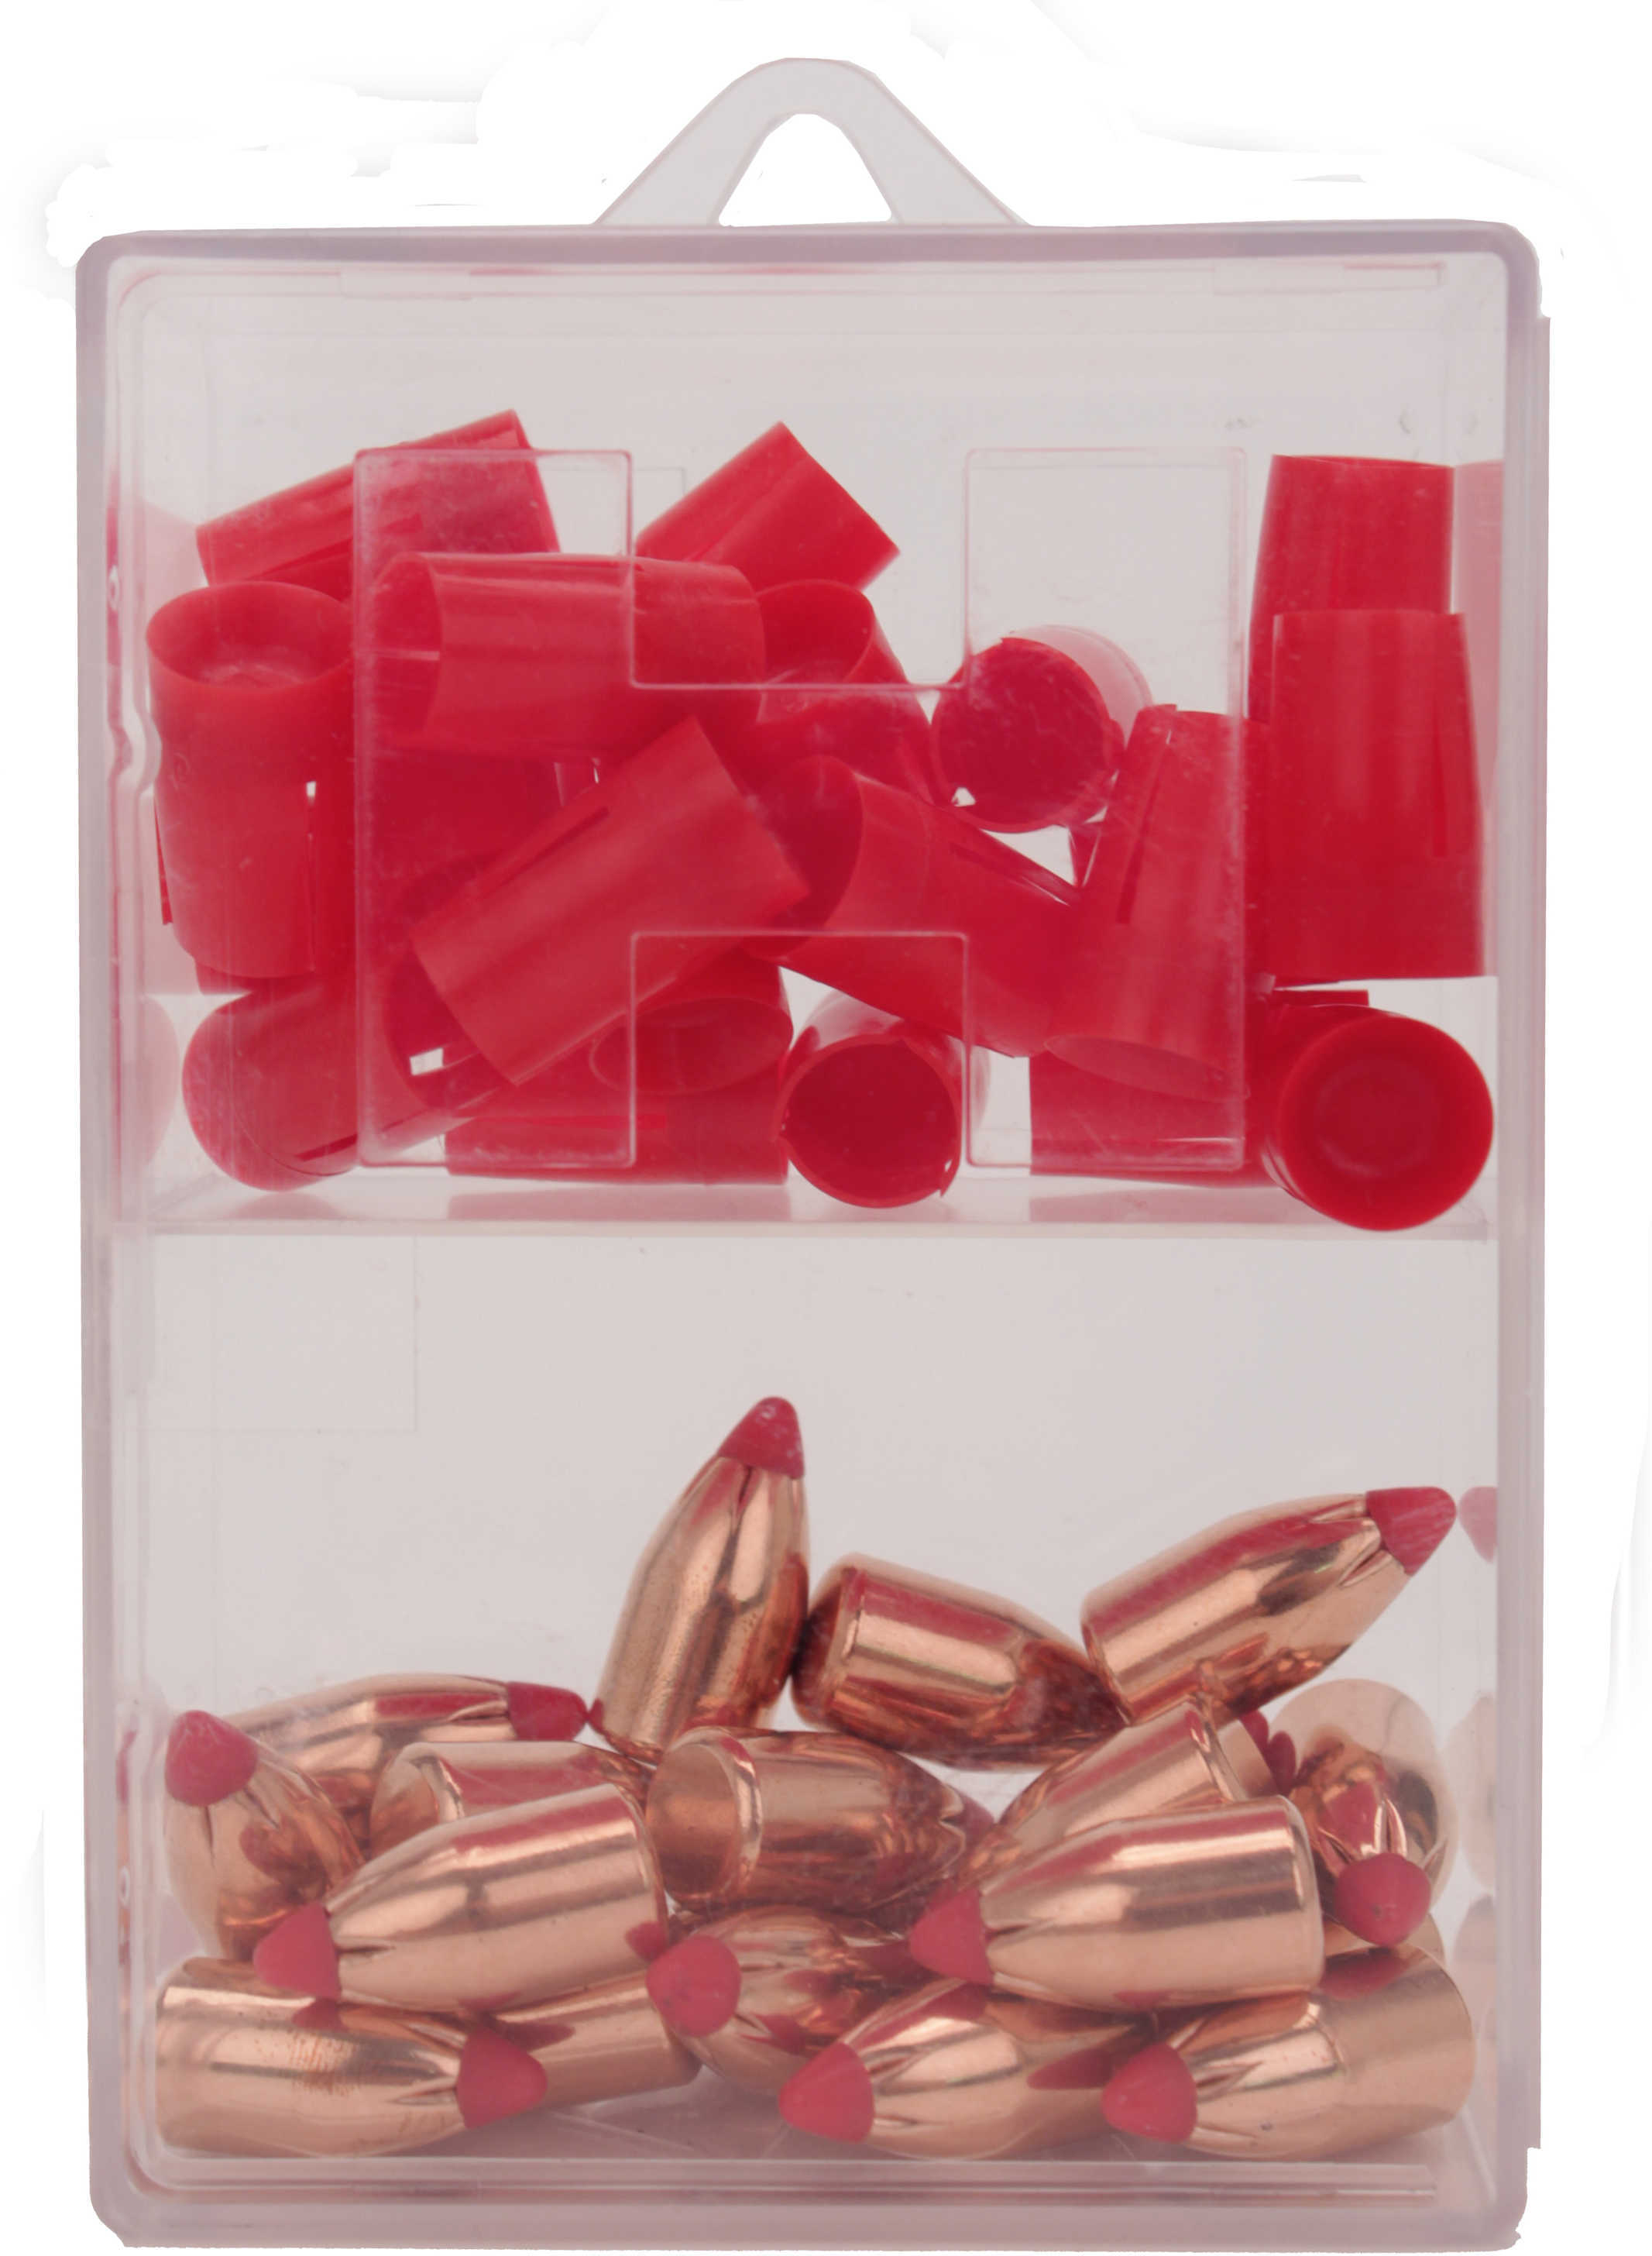 Hornady 50 Caliber Sabot Low Drag With 45 250 SST Muzzleloading Bullets 20 Per Box Md: 67273